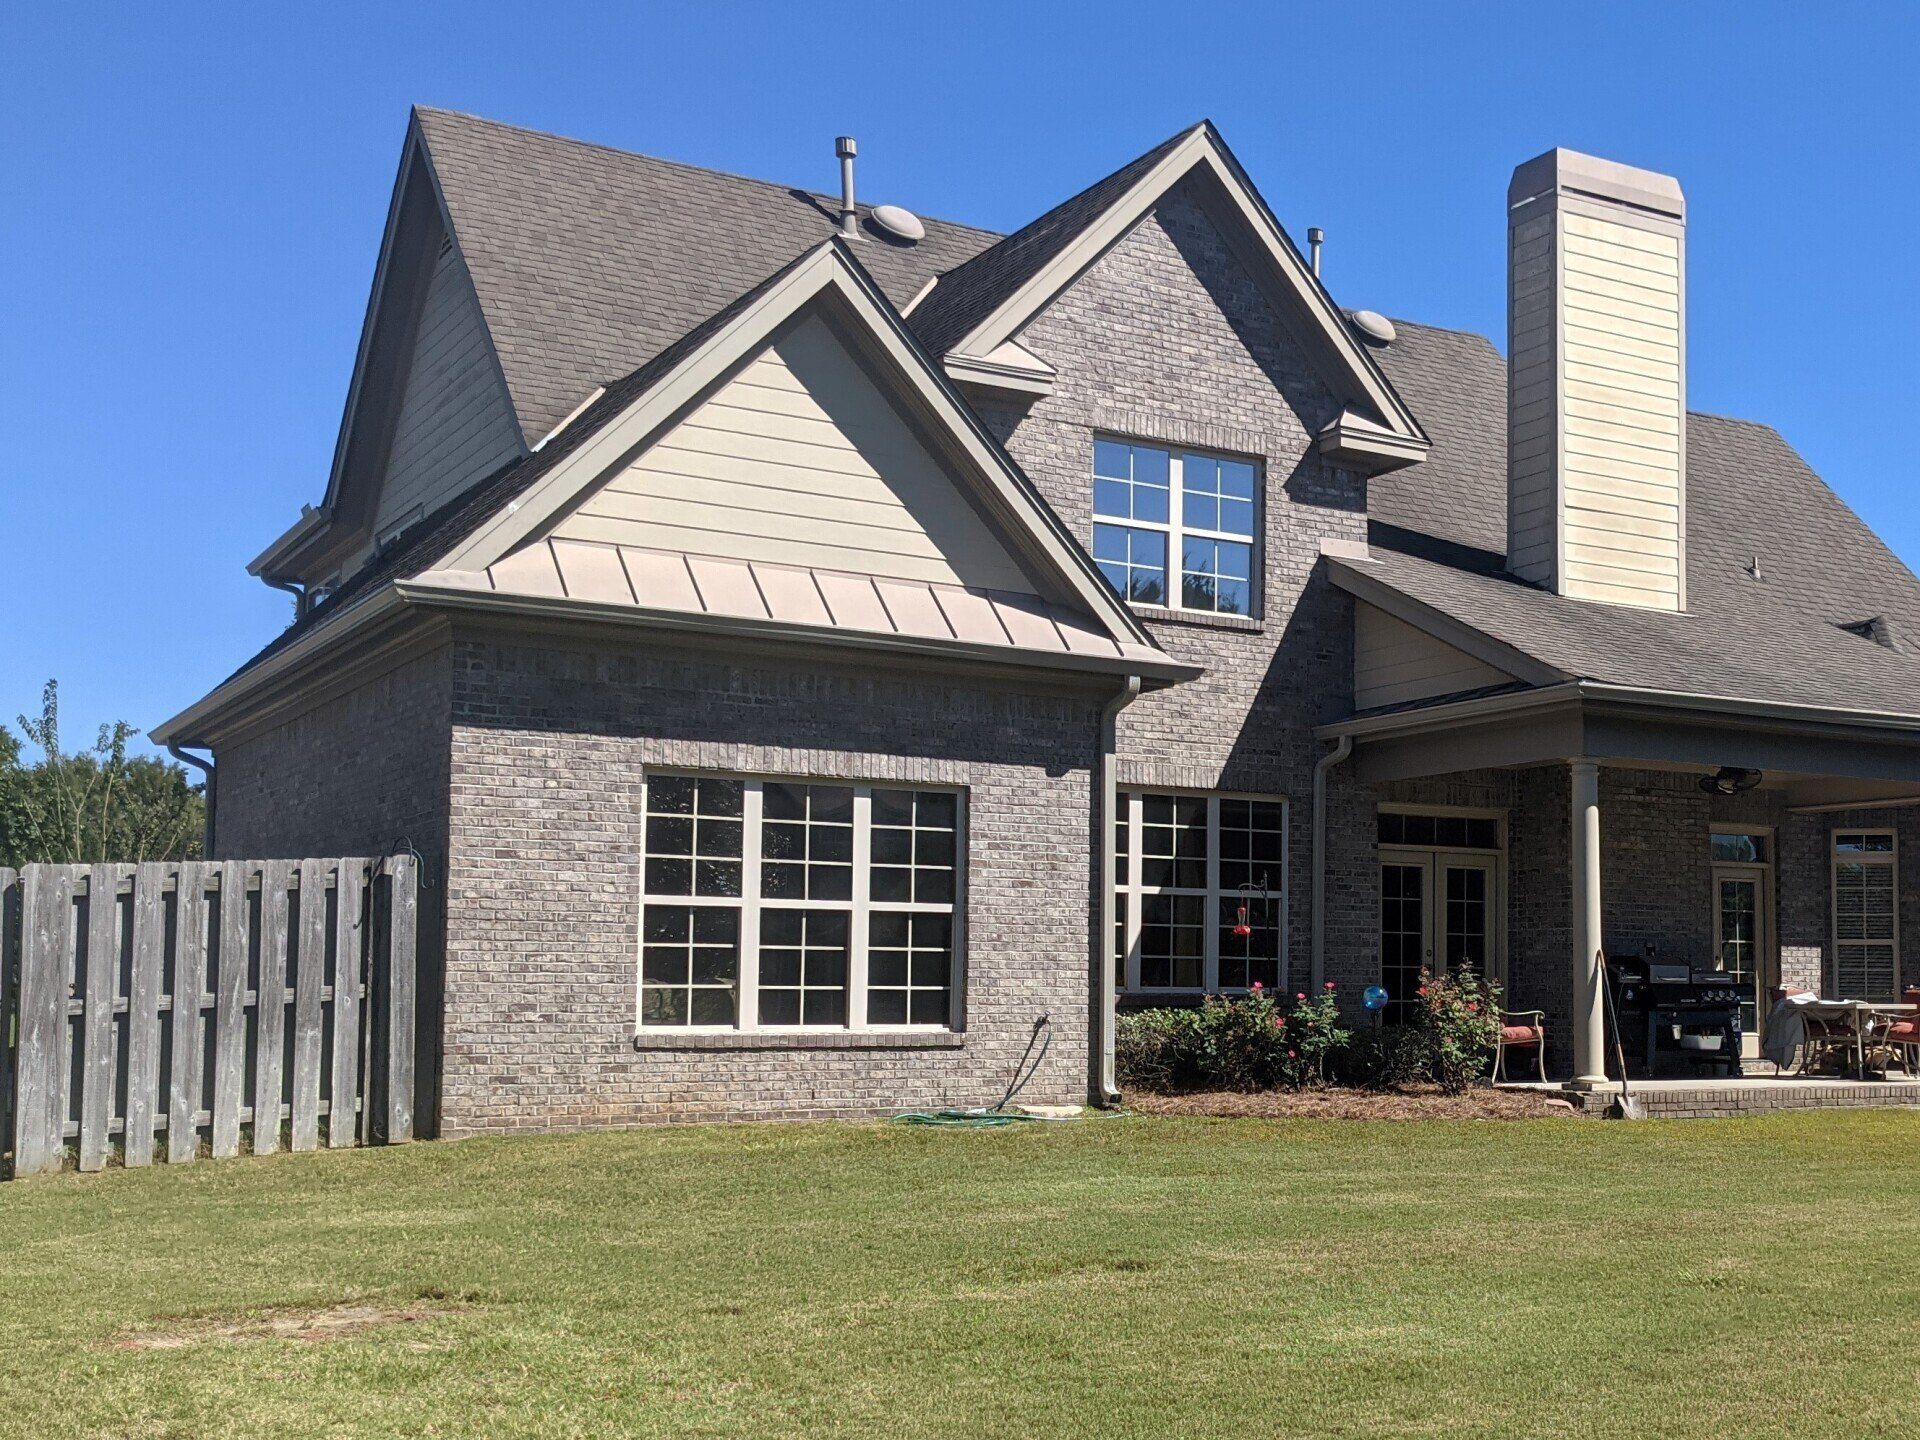 residential tint lowering utility costs in Montgomery AL - REAL SPF Energy Efficient Home Tint stops temperature transfer while keeping vibrant colors inside.